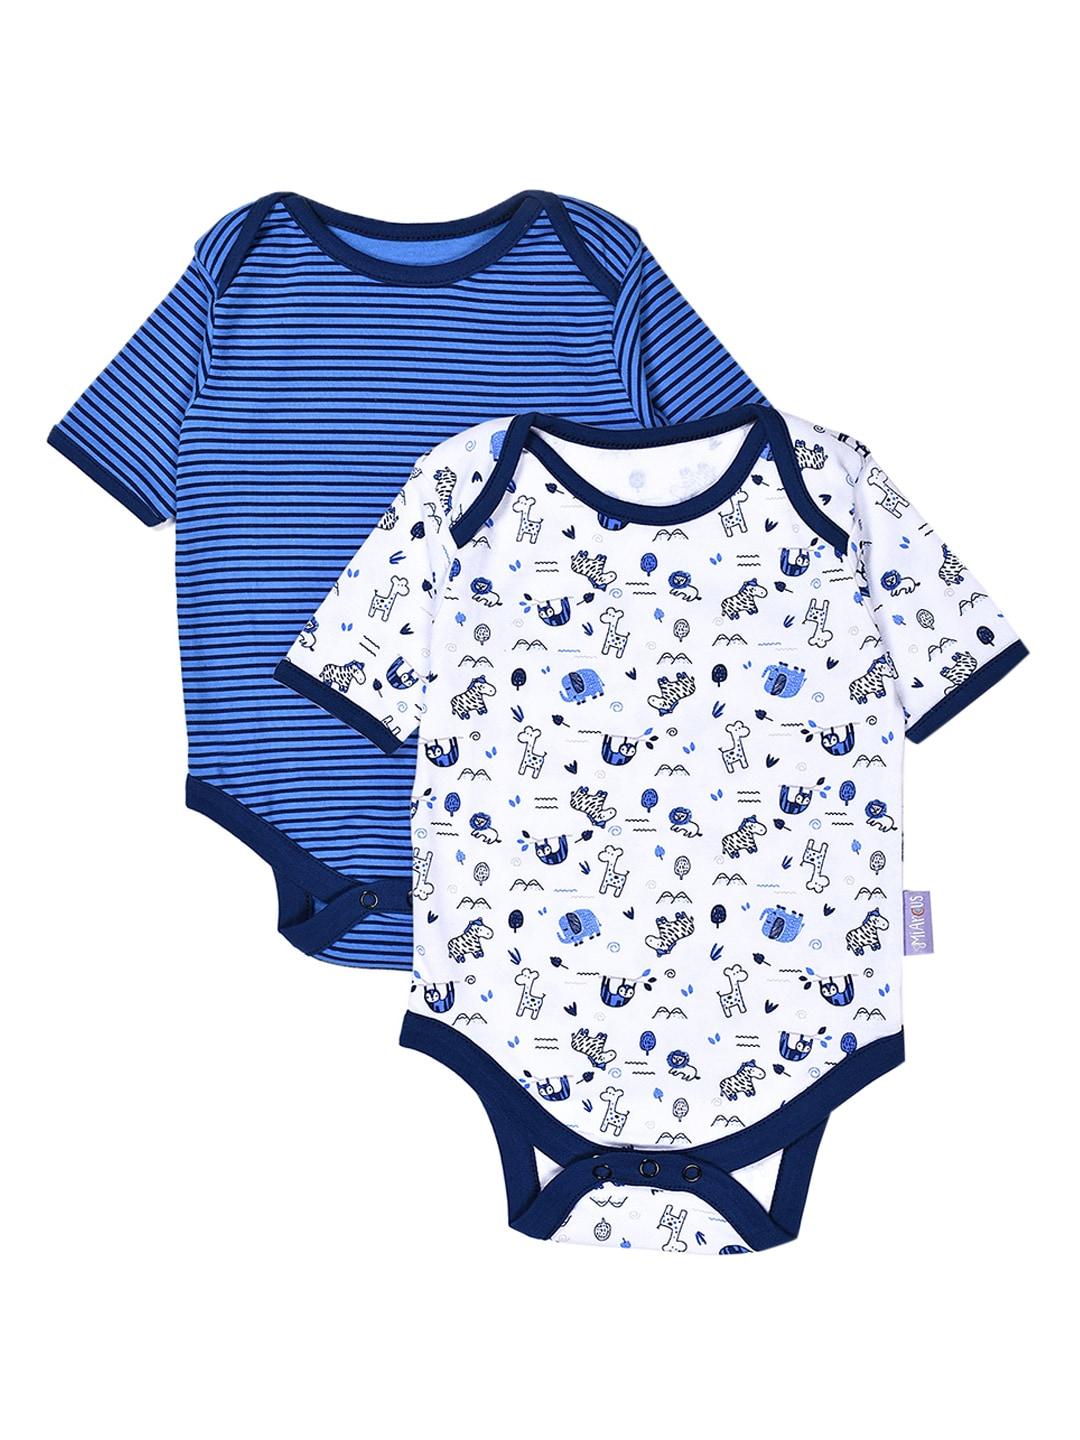 MiArcus Boys Blue & White Set of 2 Printed Knitted Rompers